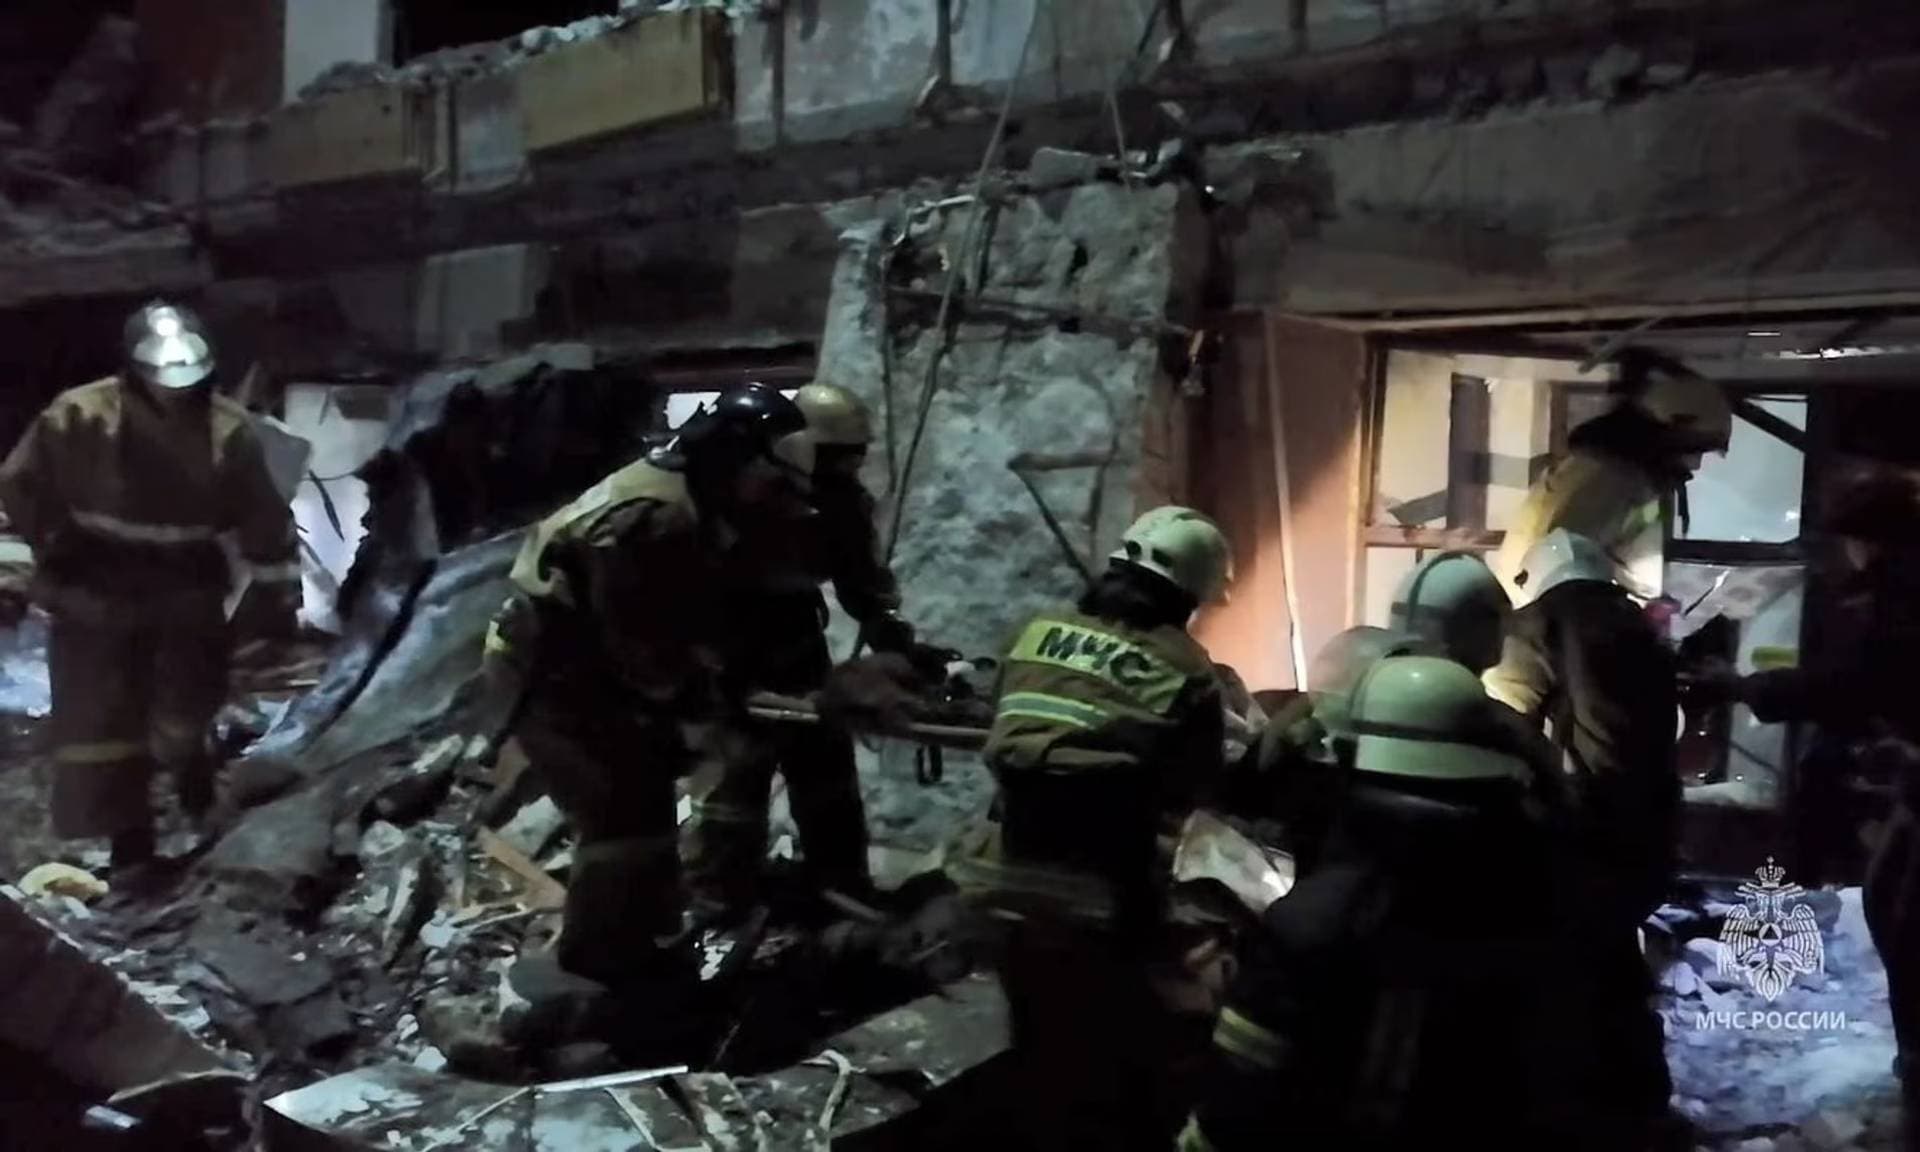 Rescuers working at the site of shelling in the city of Lysychansk